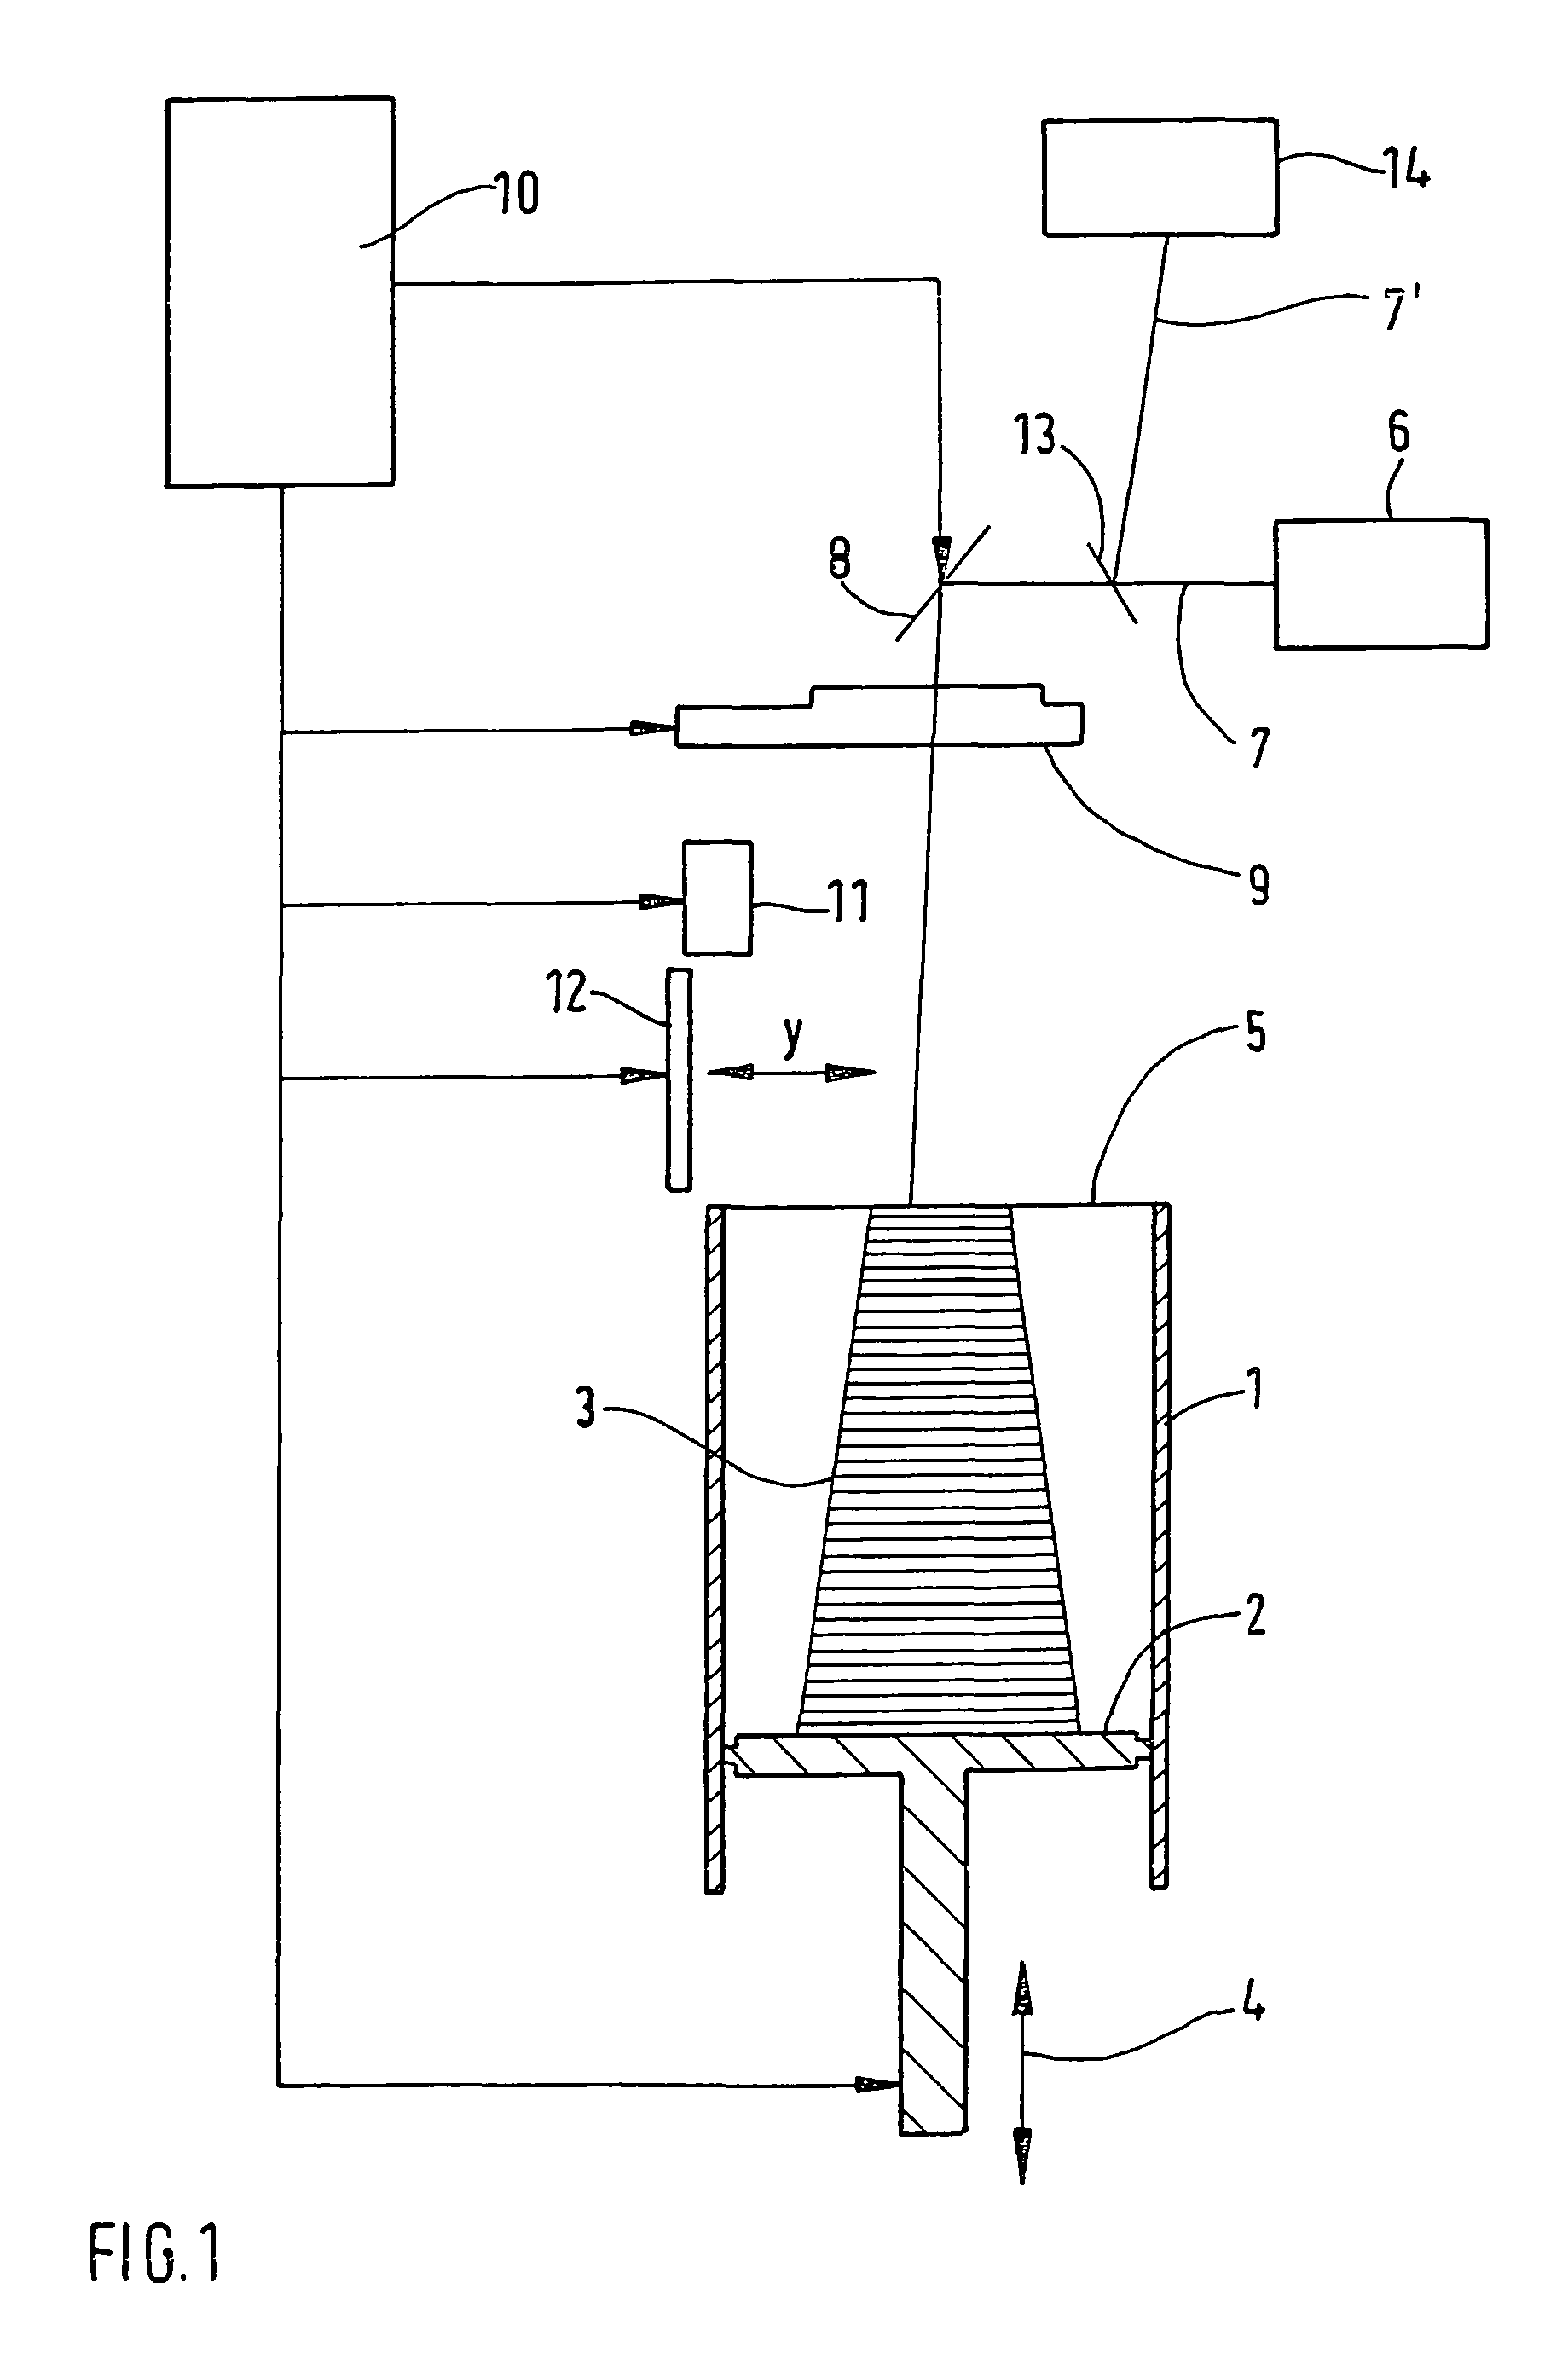 Method of manufacturing a three-dimensional object